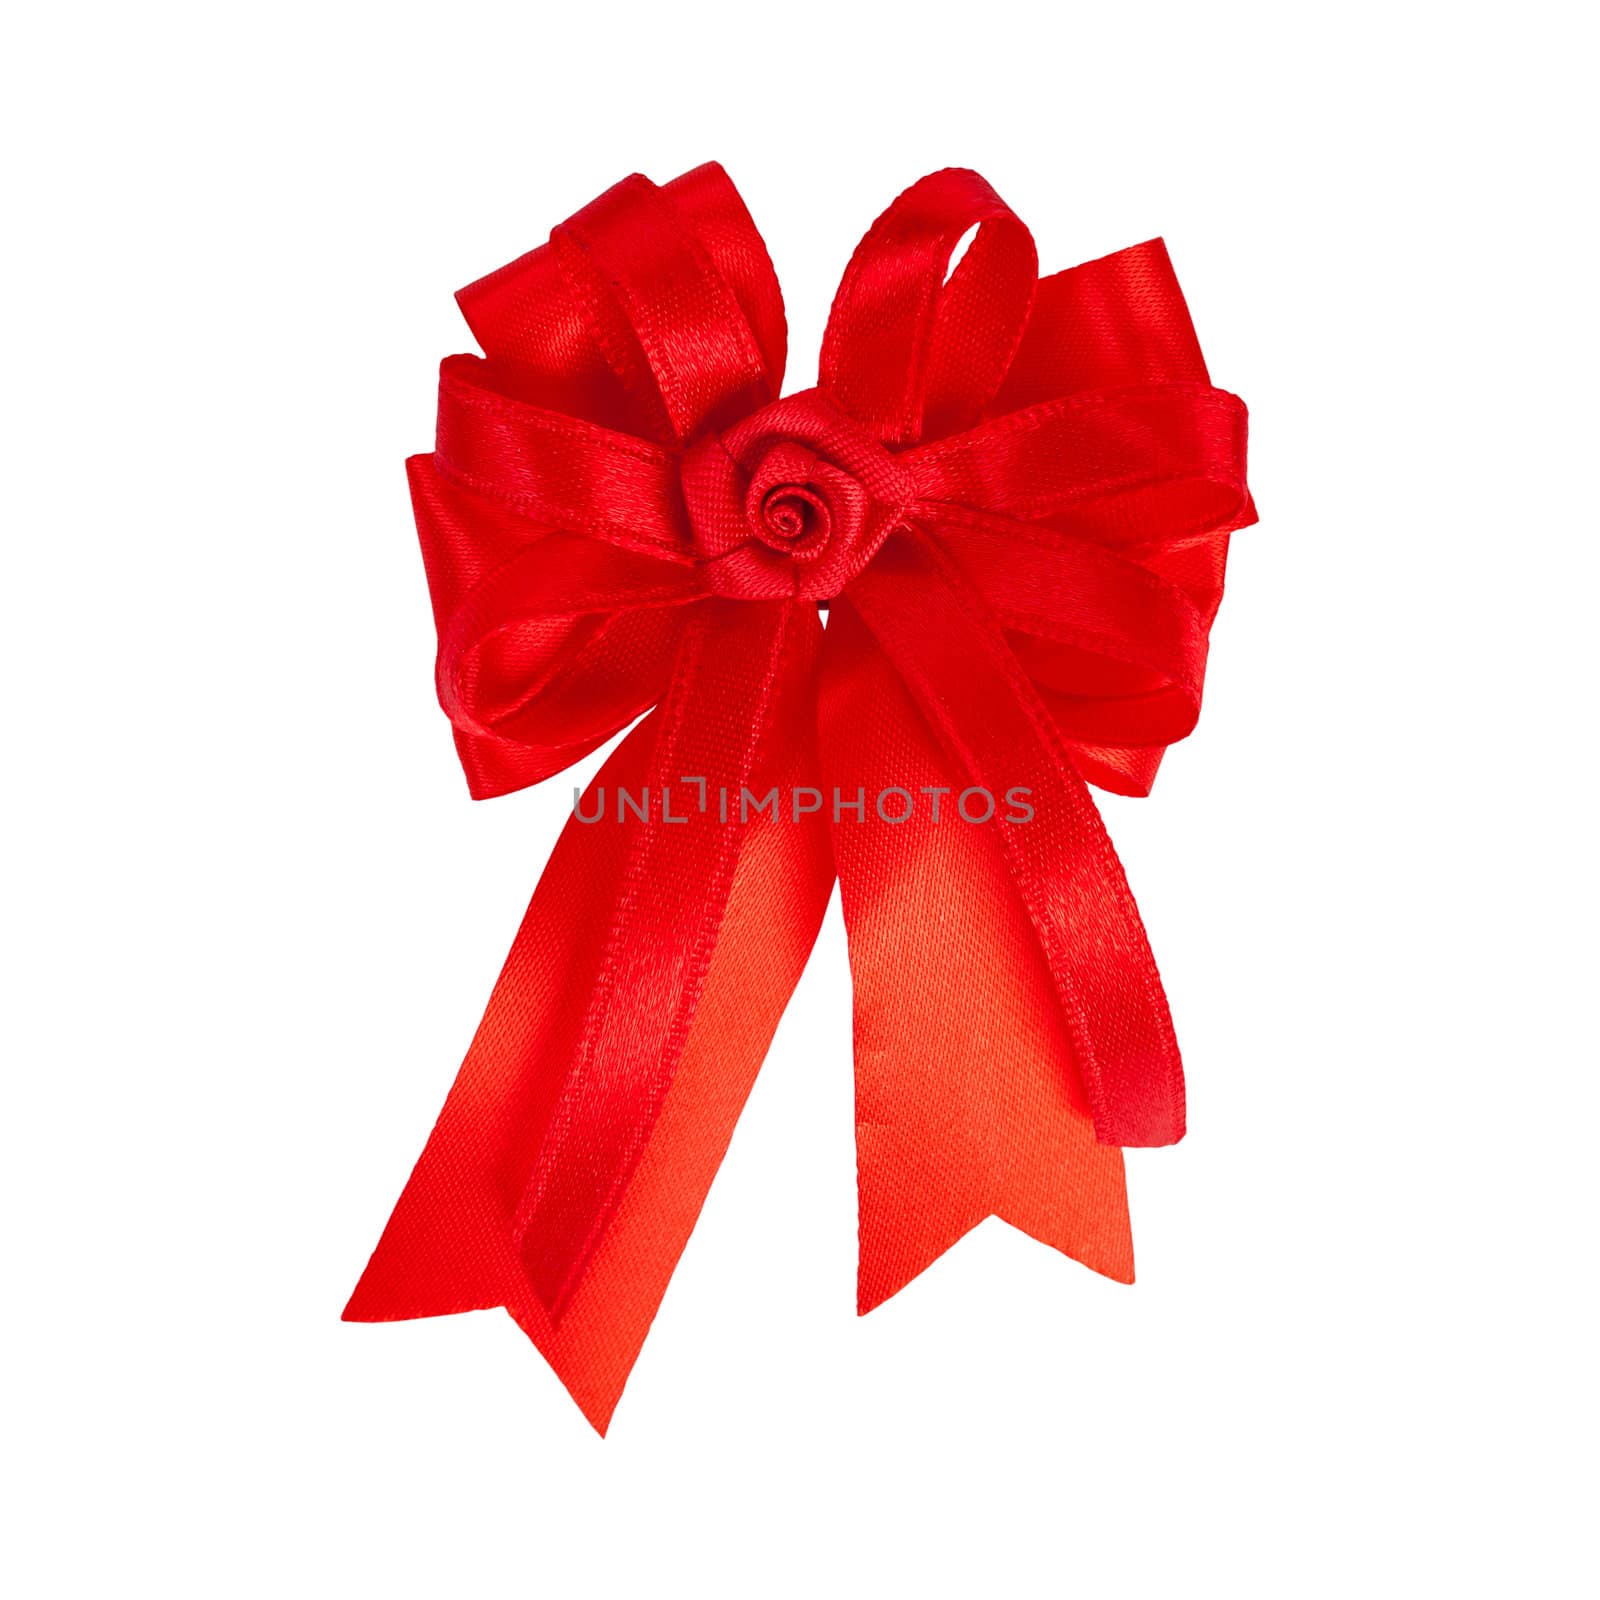 Festive red bow made of ribbon isolated on white by FrameAngel